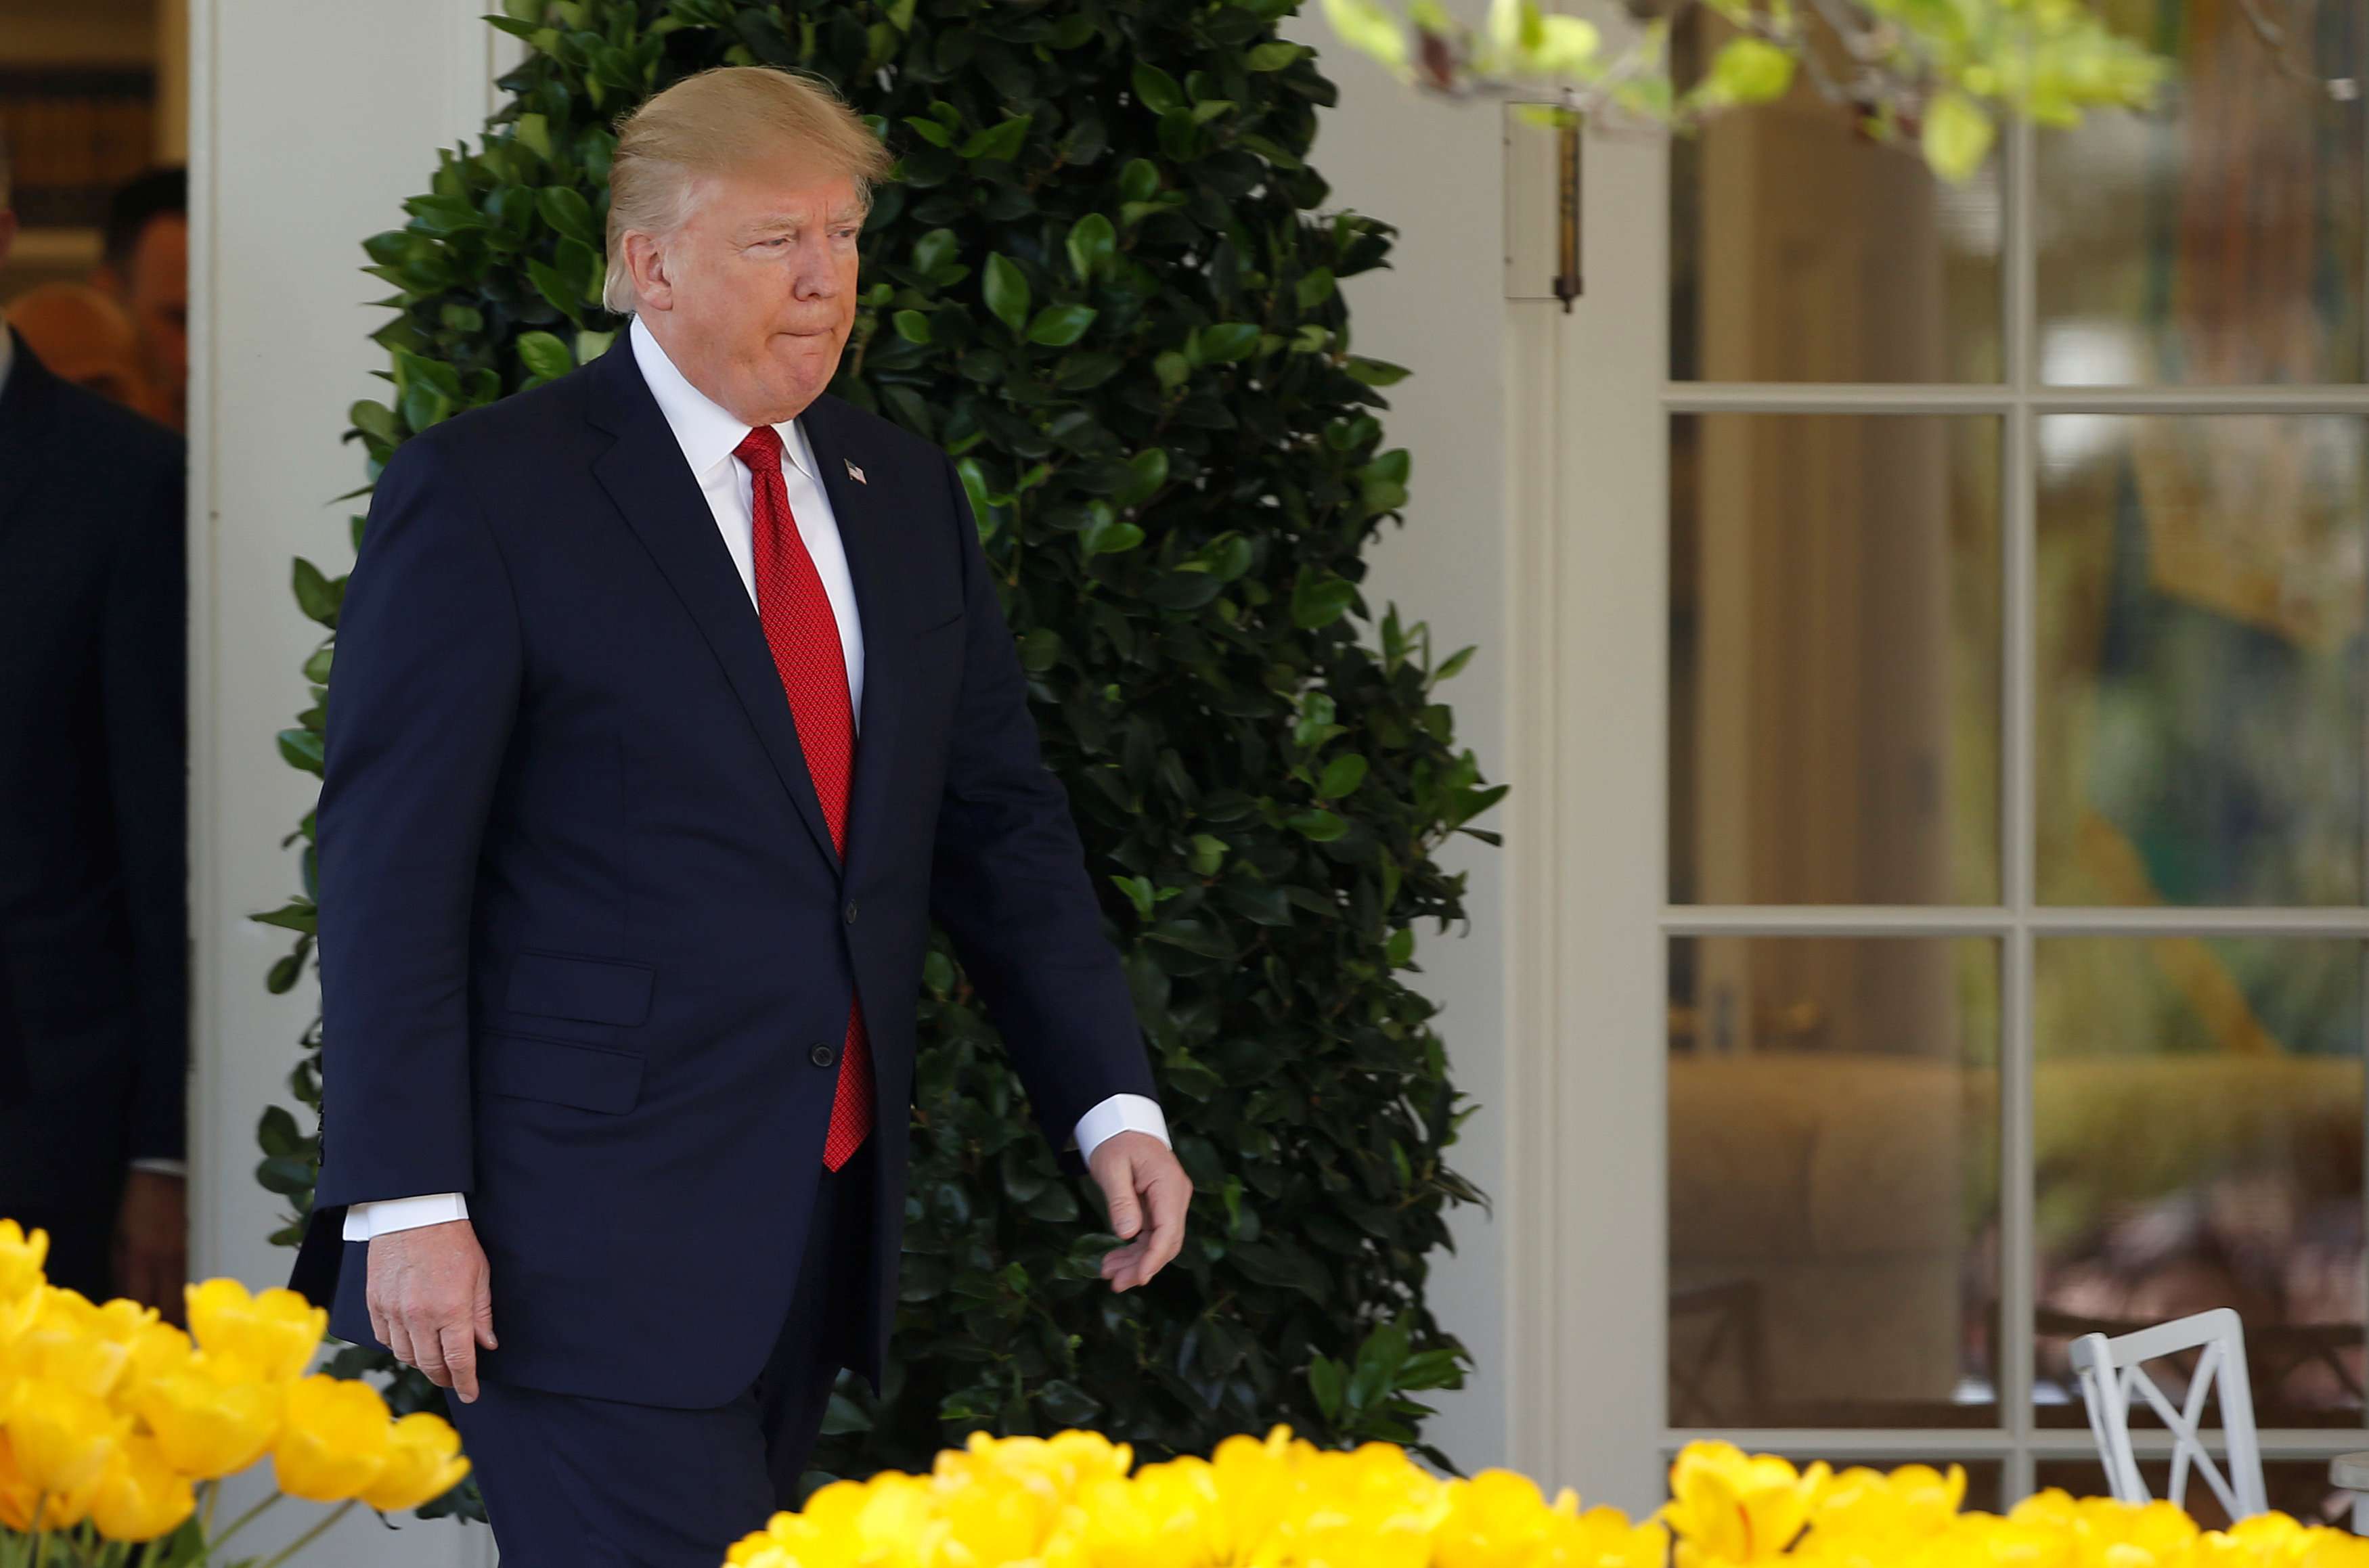 US President Donald Trump, seen here at the White House on Tuesday, says he gave his Chinese counterpart Xi Jinping an ultimatum in their meeting last week. Photo: Reuters